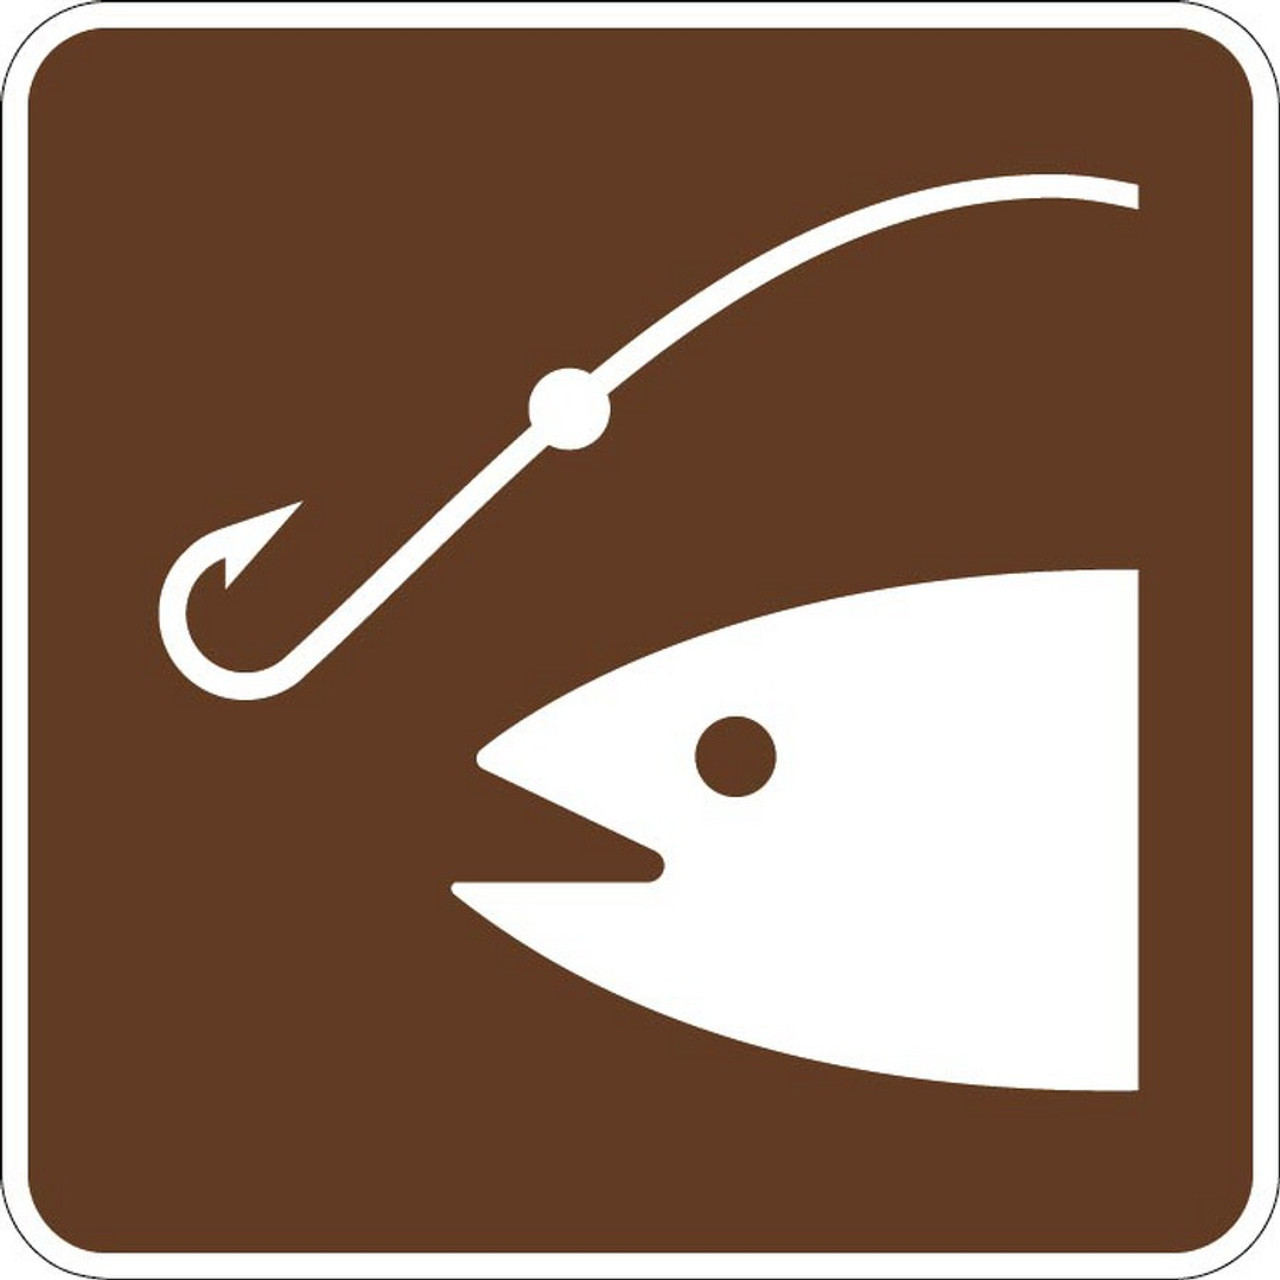 Fishing Area (Symbol) Sign RS-063 - NPS (National Park Service) Signs